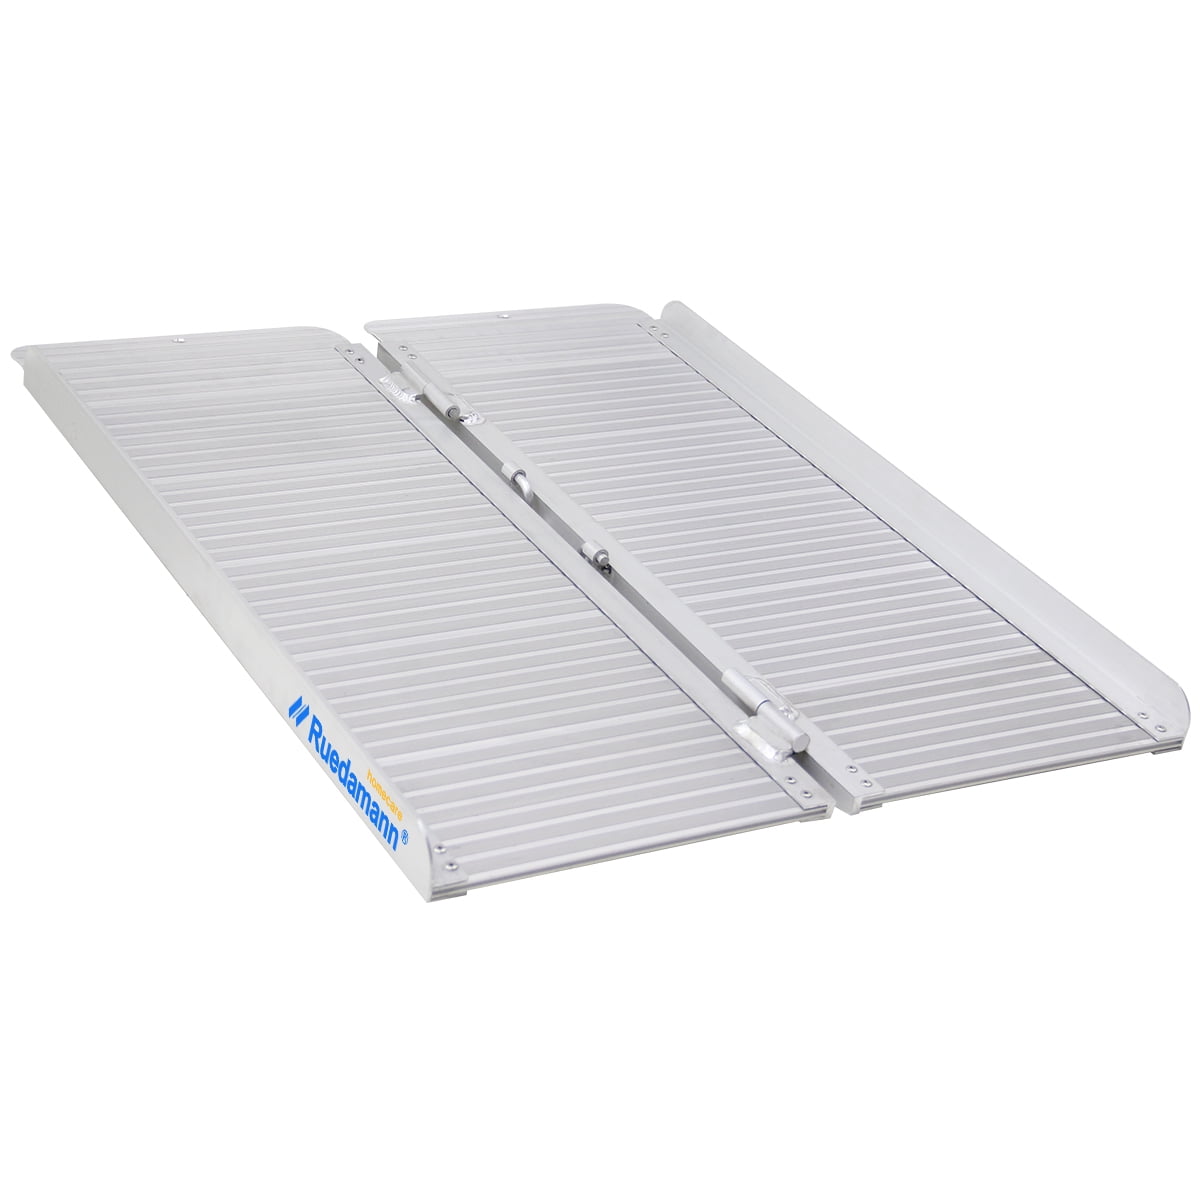 Ruedamann Threshold Ramp 3ft for Home Steps,Stairs,Doorways,Mobility ...